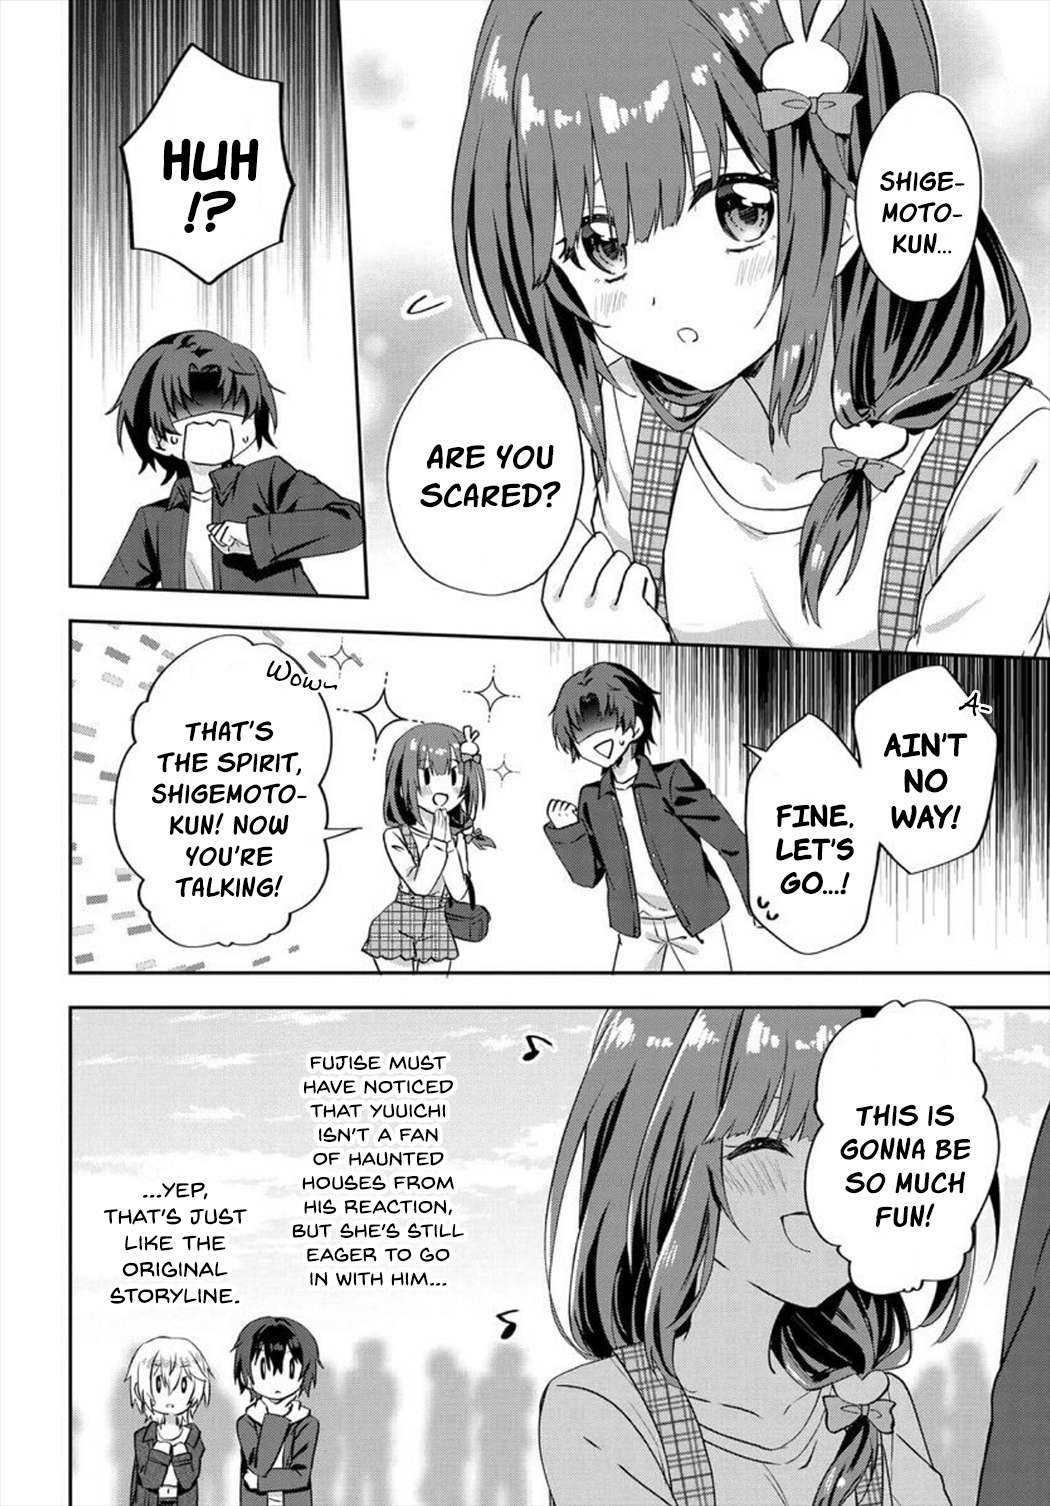 Since I’Ve Entered The World Of Romantic Comedy Manga, I’Ll Do My Best To Make The Losing Heroine Happy - chapter 7.2 - #3